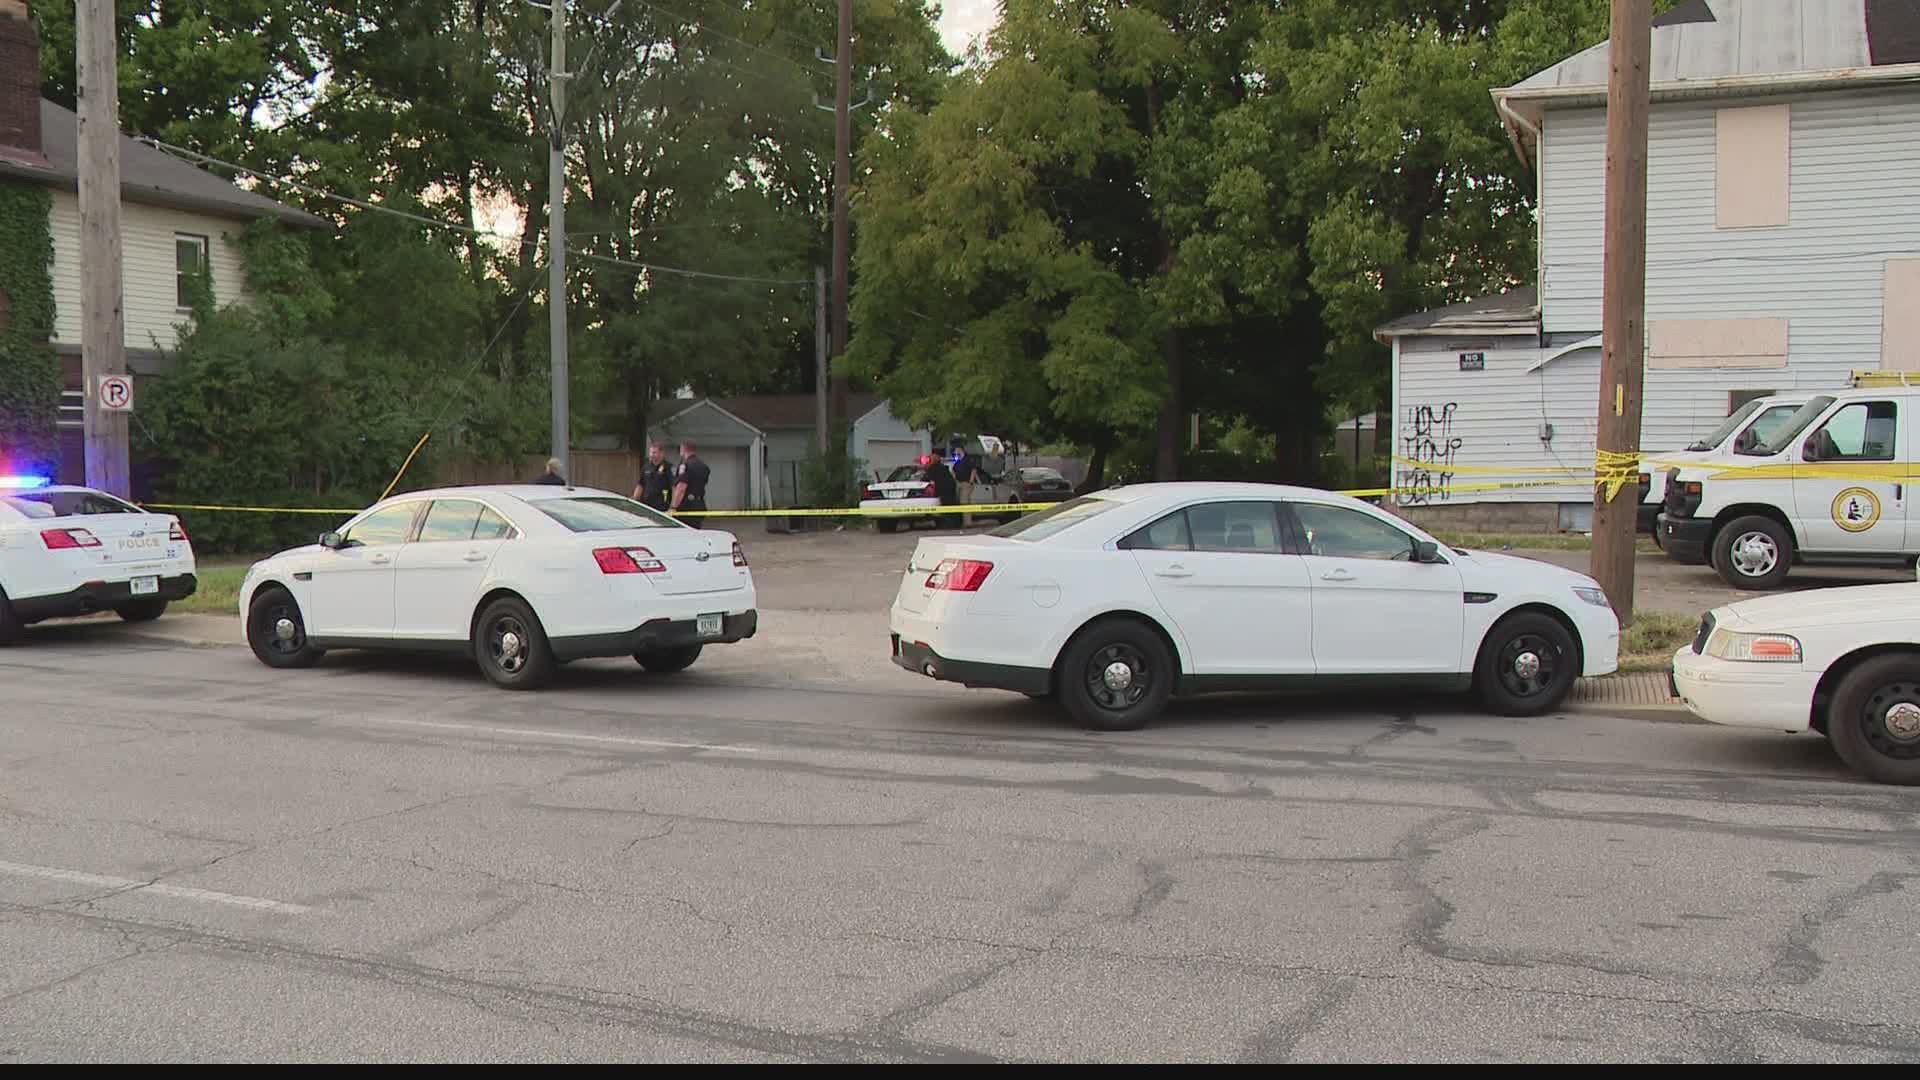 IMPD said one person was fatally shot Sunday evening at the 3000 block of North Capitol Avenue.